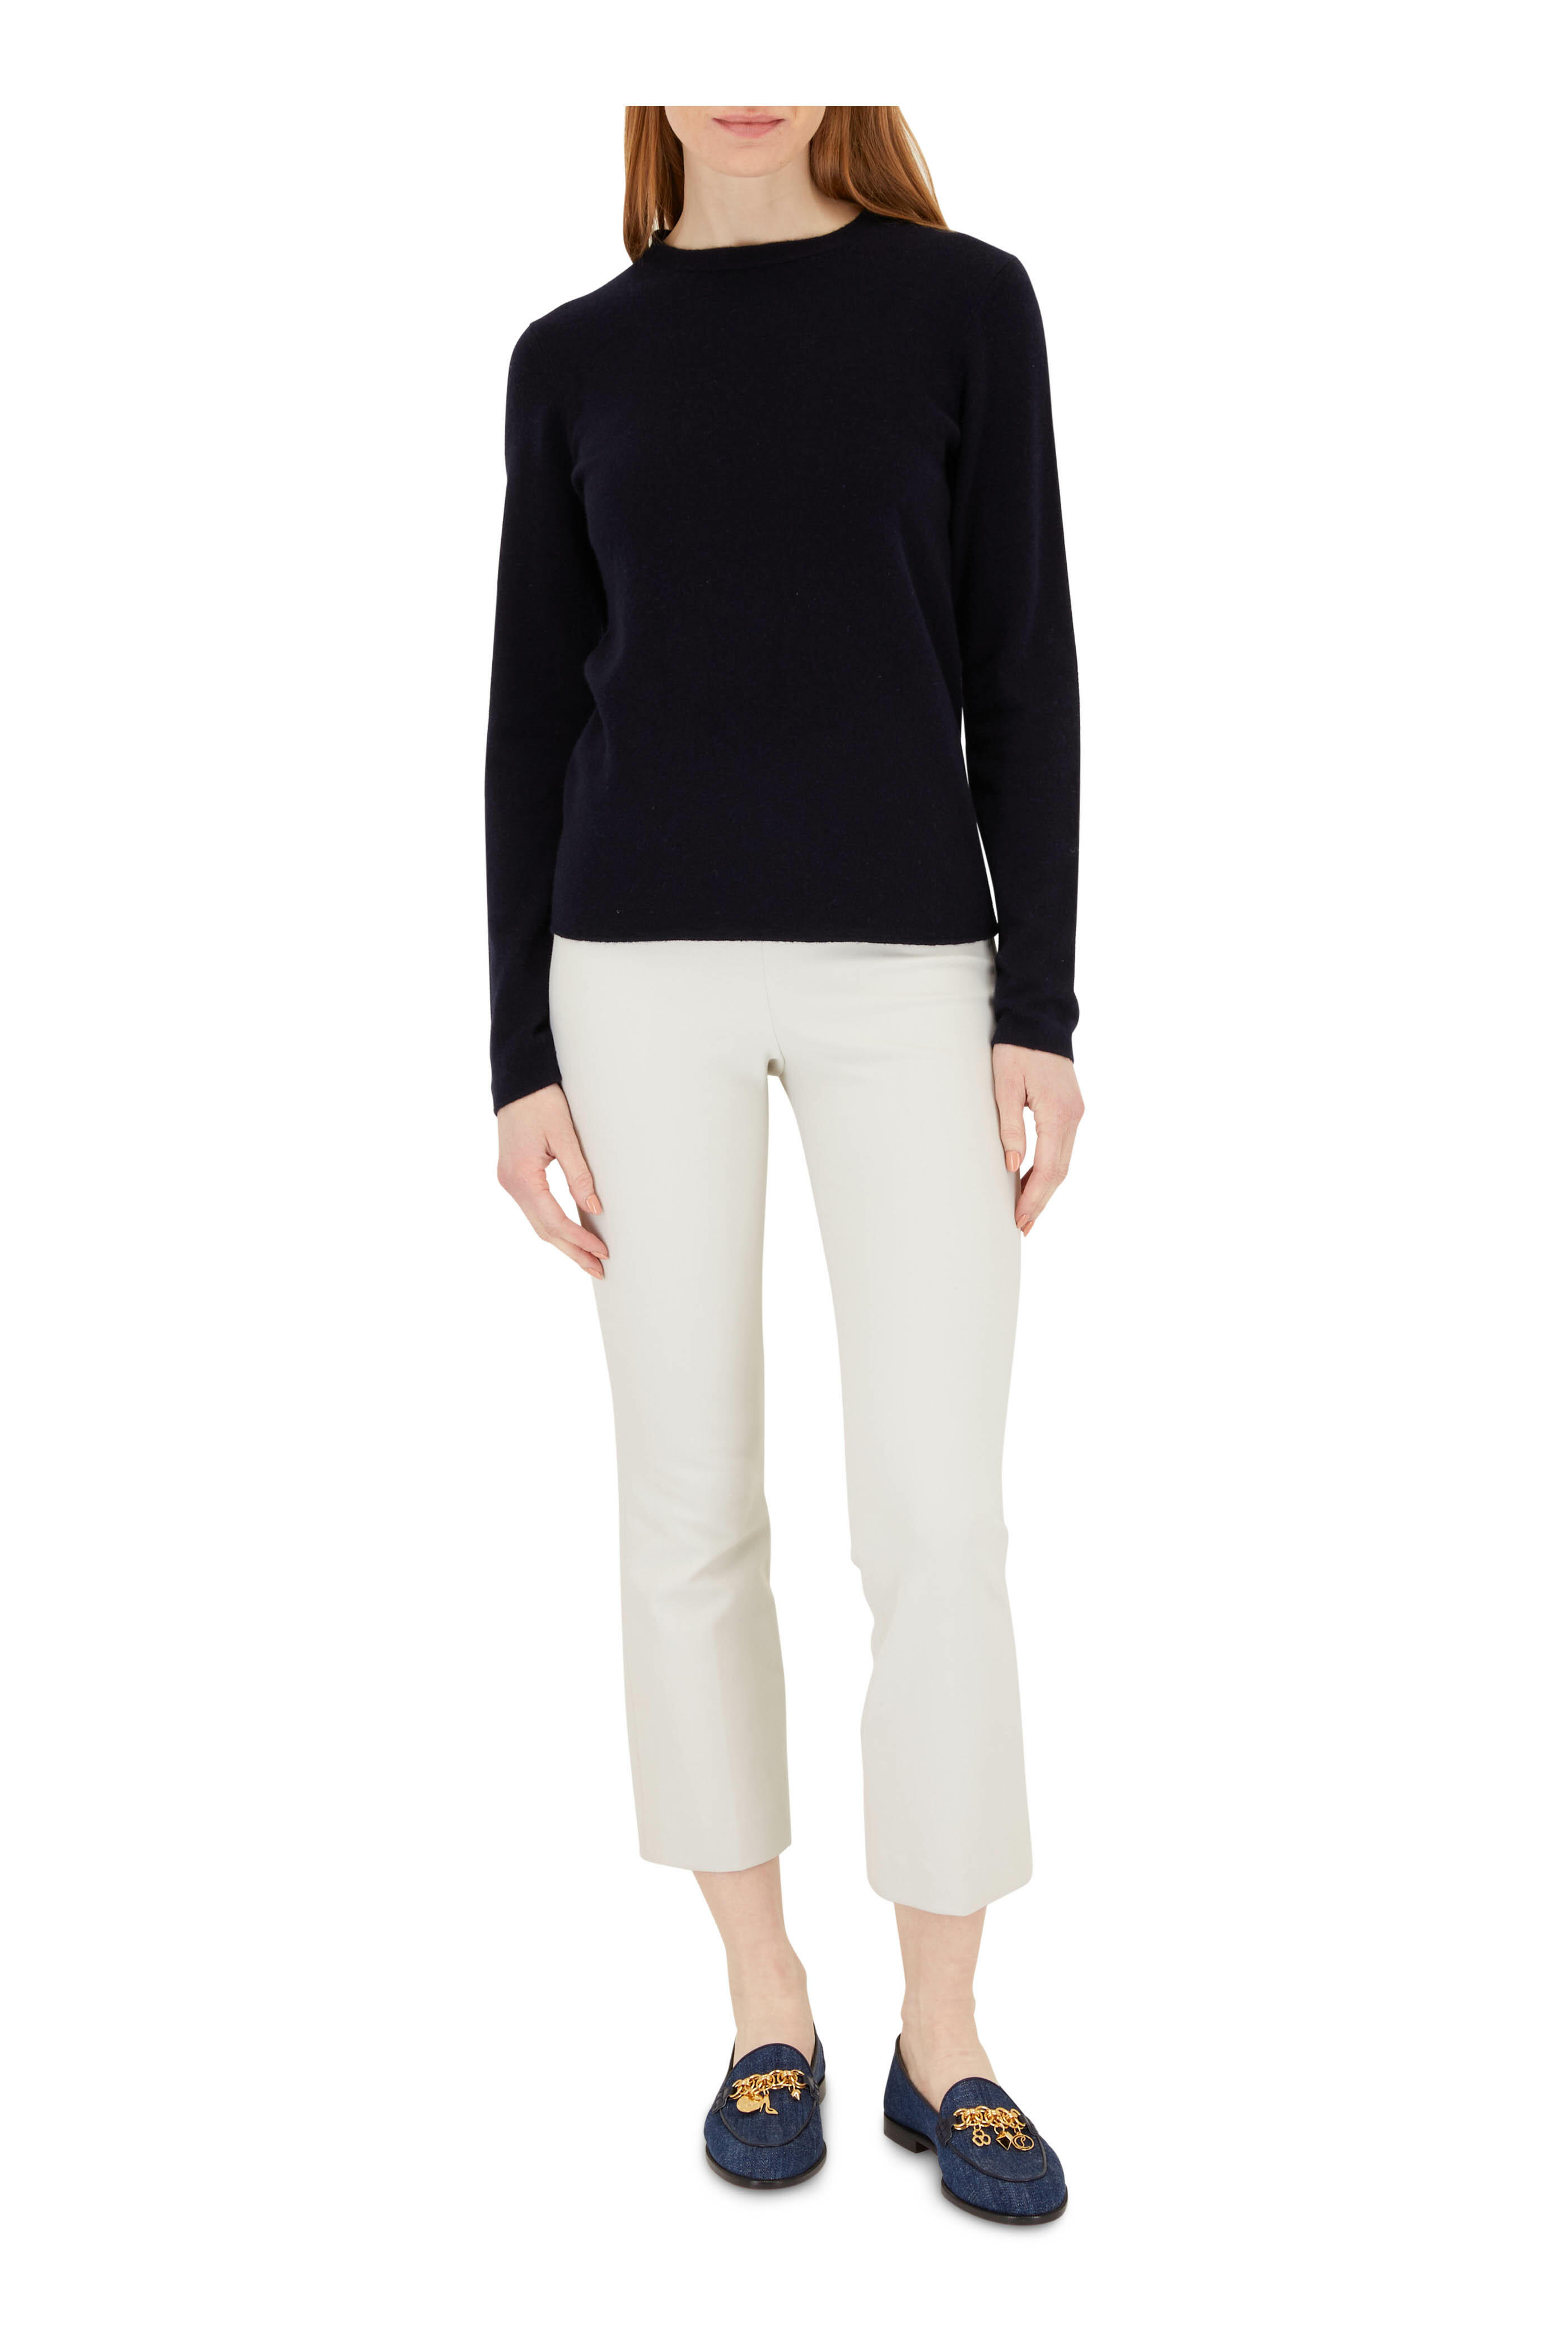 Vince - Coastal Blue Clean Edge Sweater | Mitchell Stores